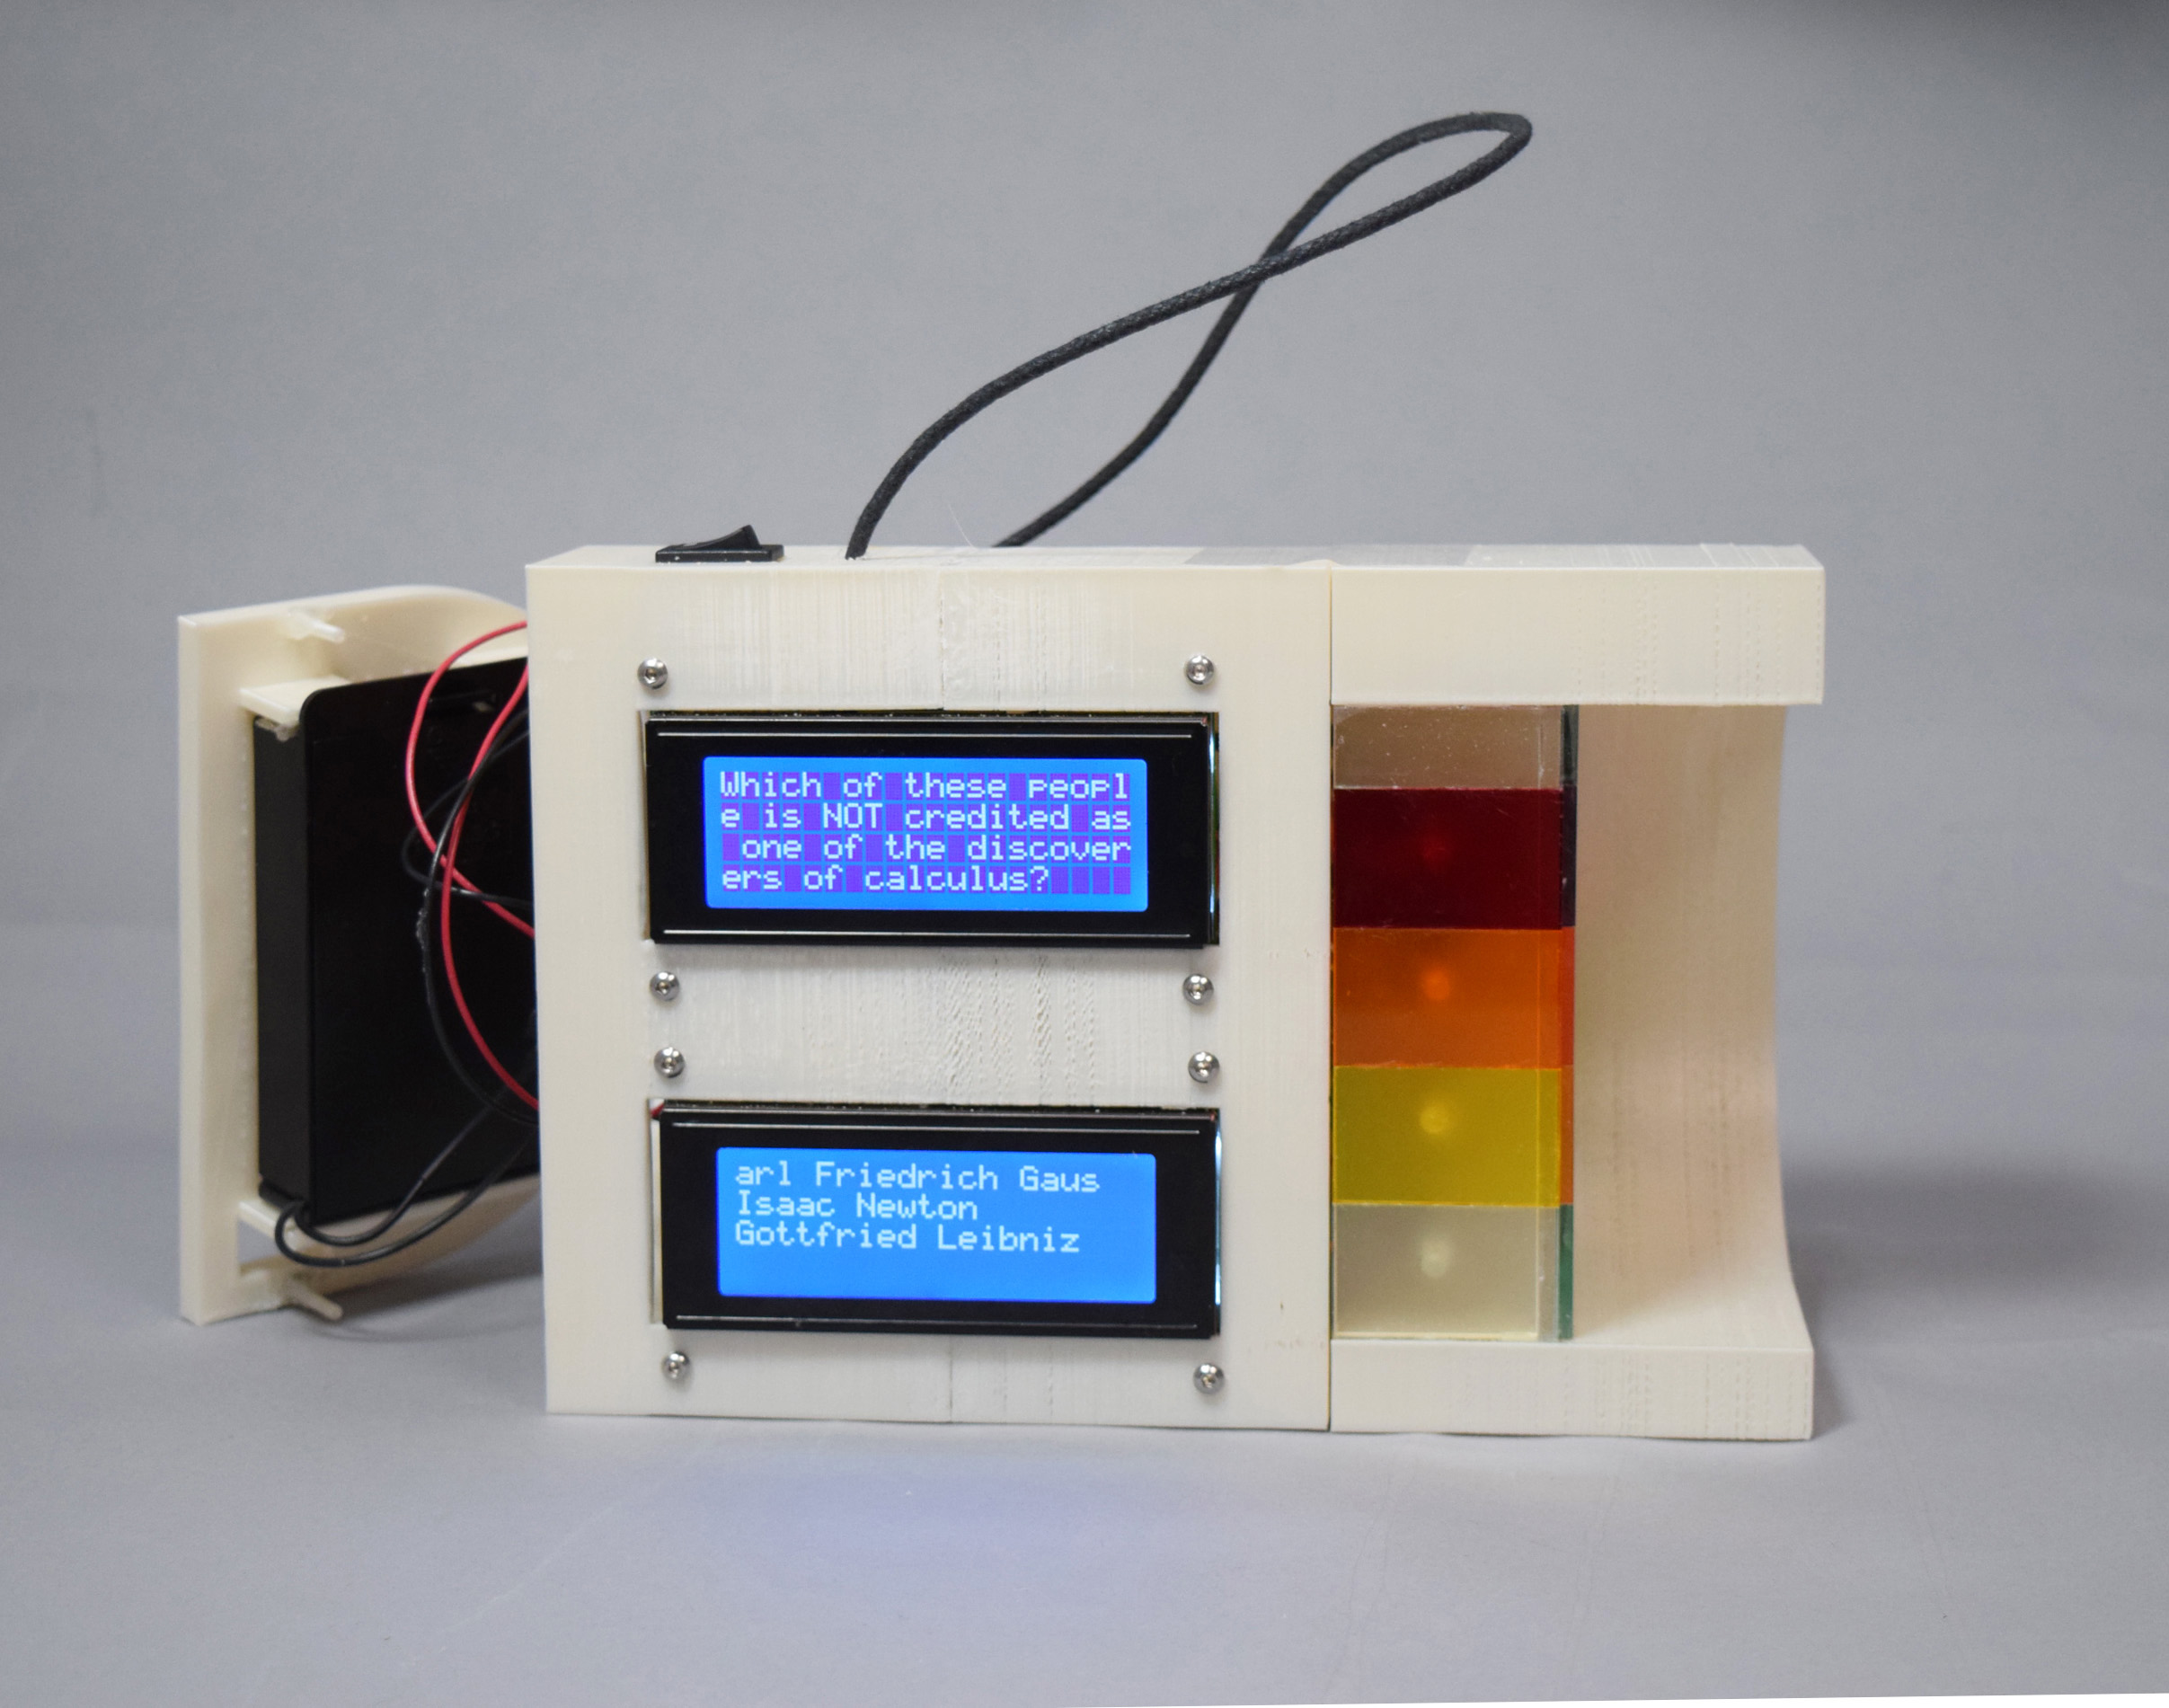 Photograph of a rounded white plastic device with an open side compartment showing a battery holder, a front panel with two large text display screens, and five colored stripes along the right edge.